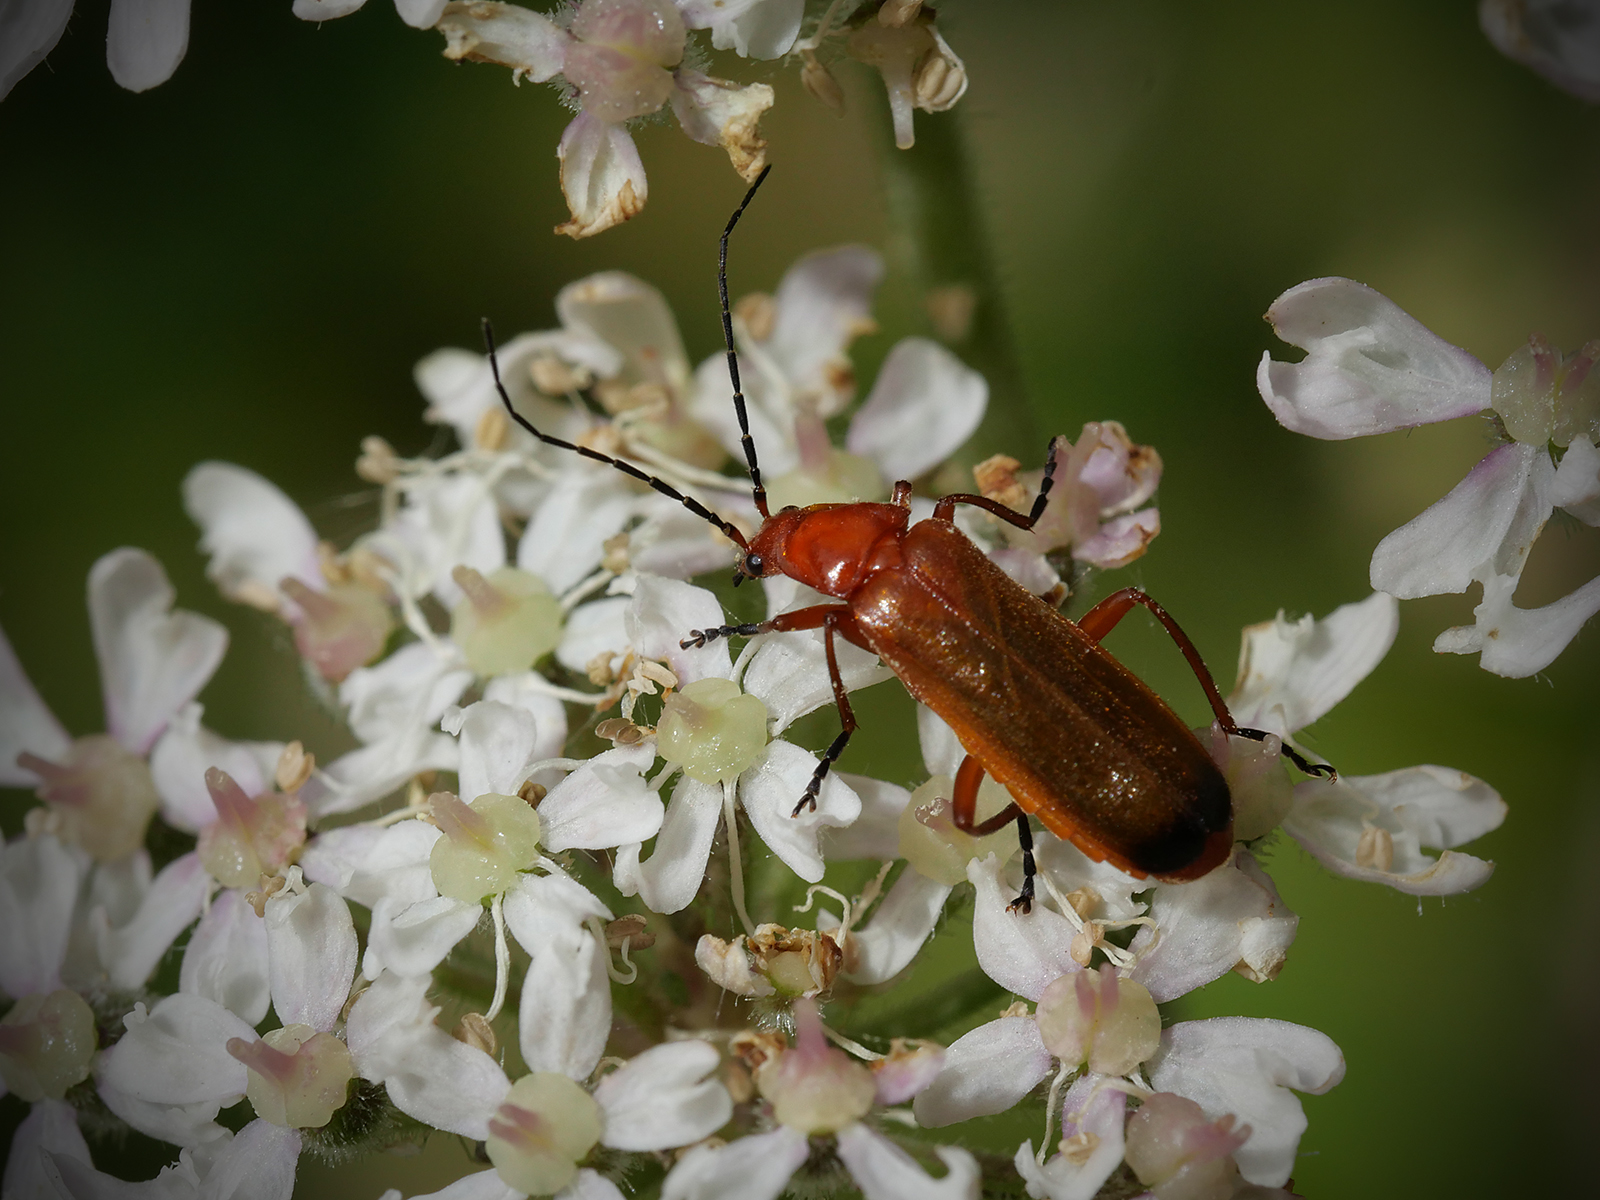 Red soldier beetle on cow parsley